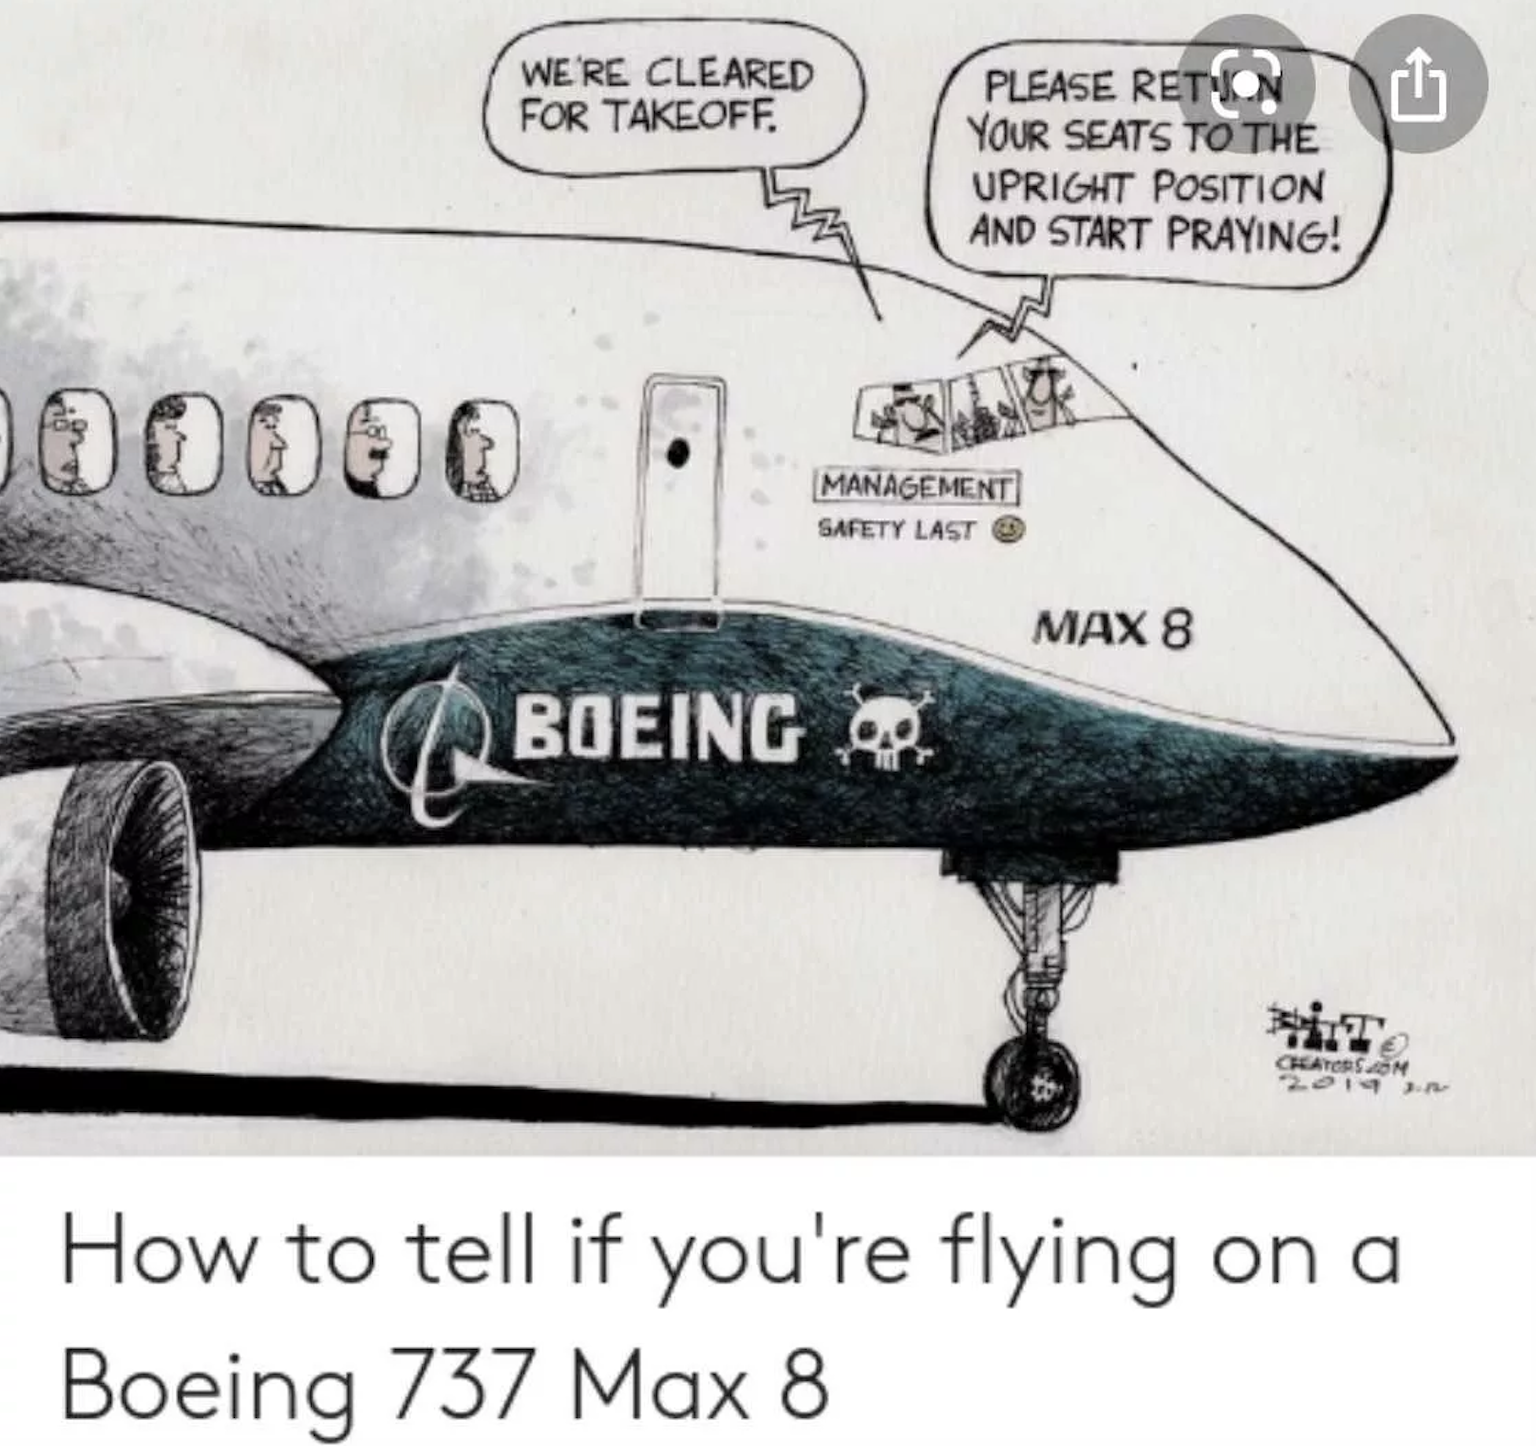 aviation - We'Re Cleared For Takeoff 000000 Boeing Please Retion Your Seats To The Upright Position And Start Praying! Management Safety Last Max 8 r Create 2014 J How to tell if you're flying on a Boeing 737 Max 8